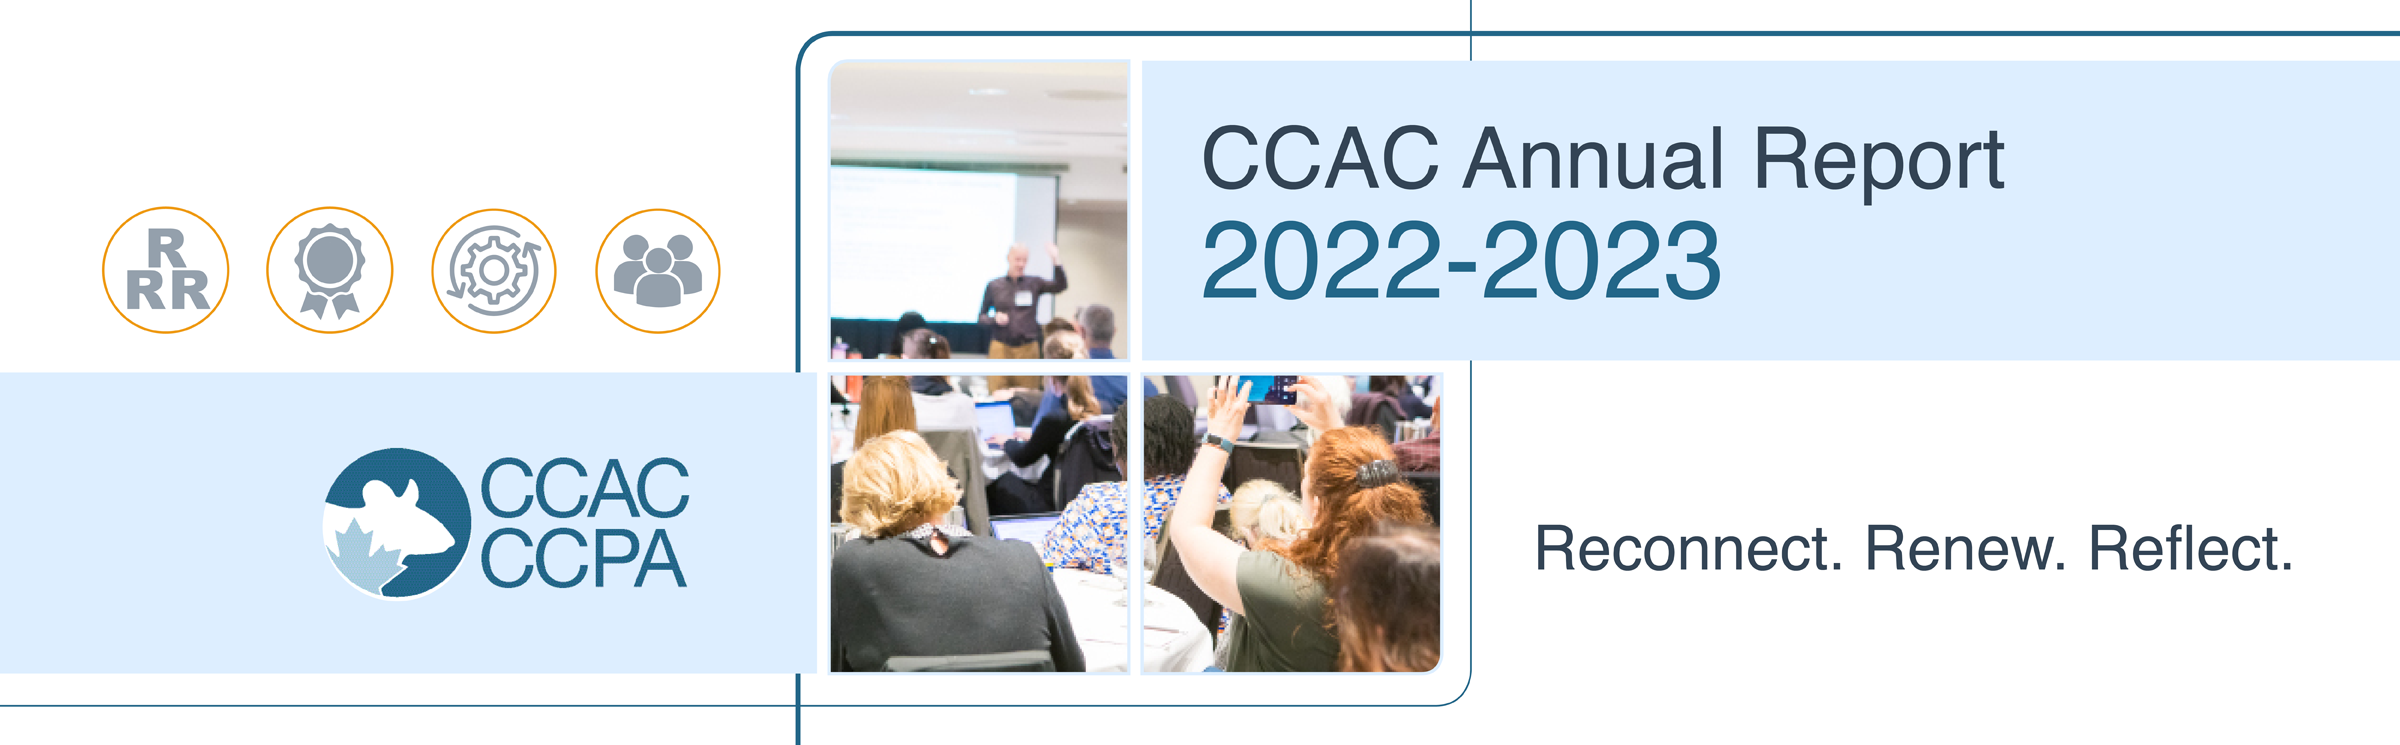 Cover of the CCAC Annual Report 2022-2023